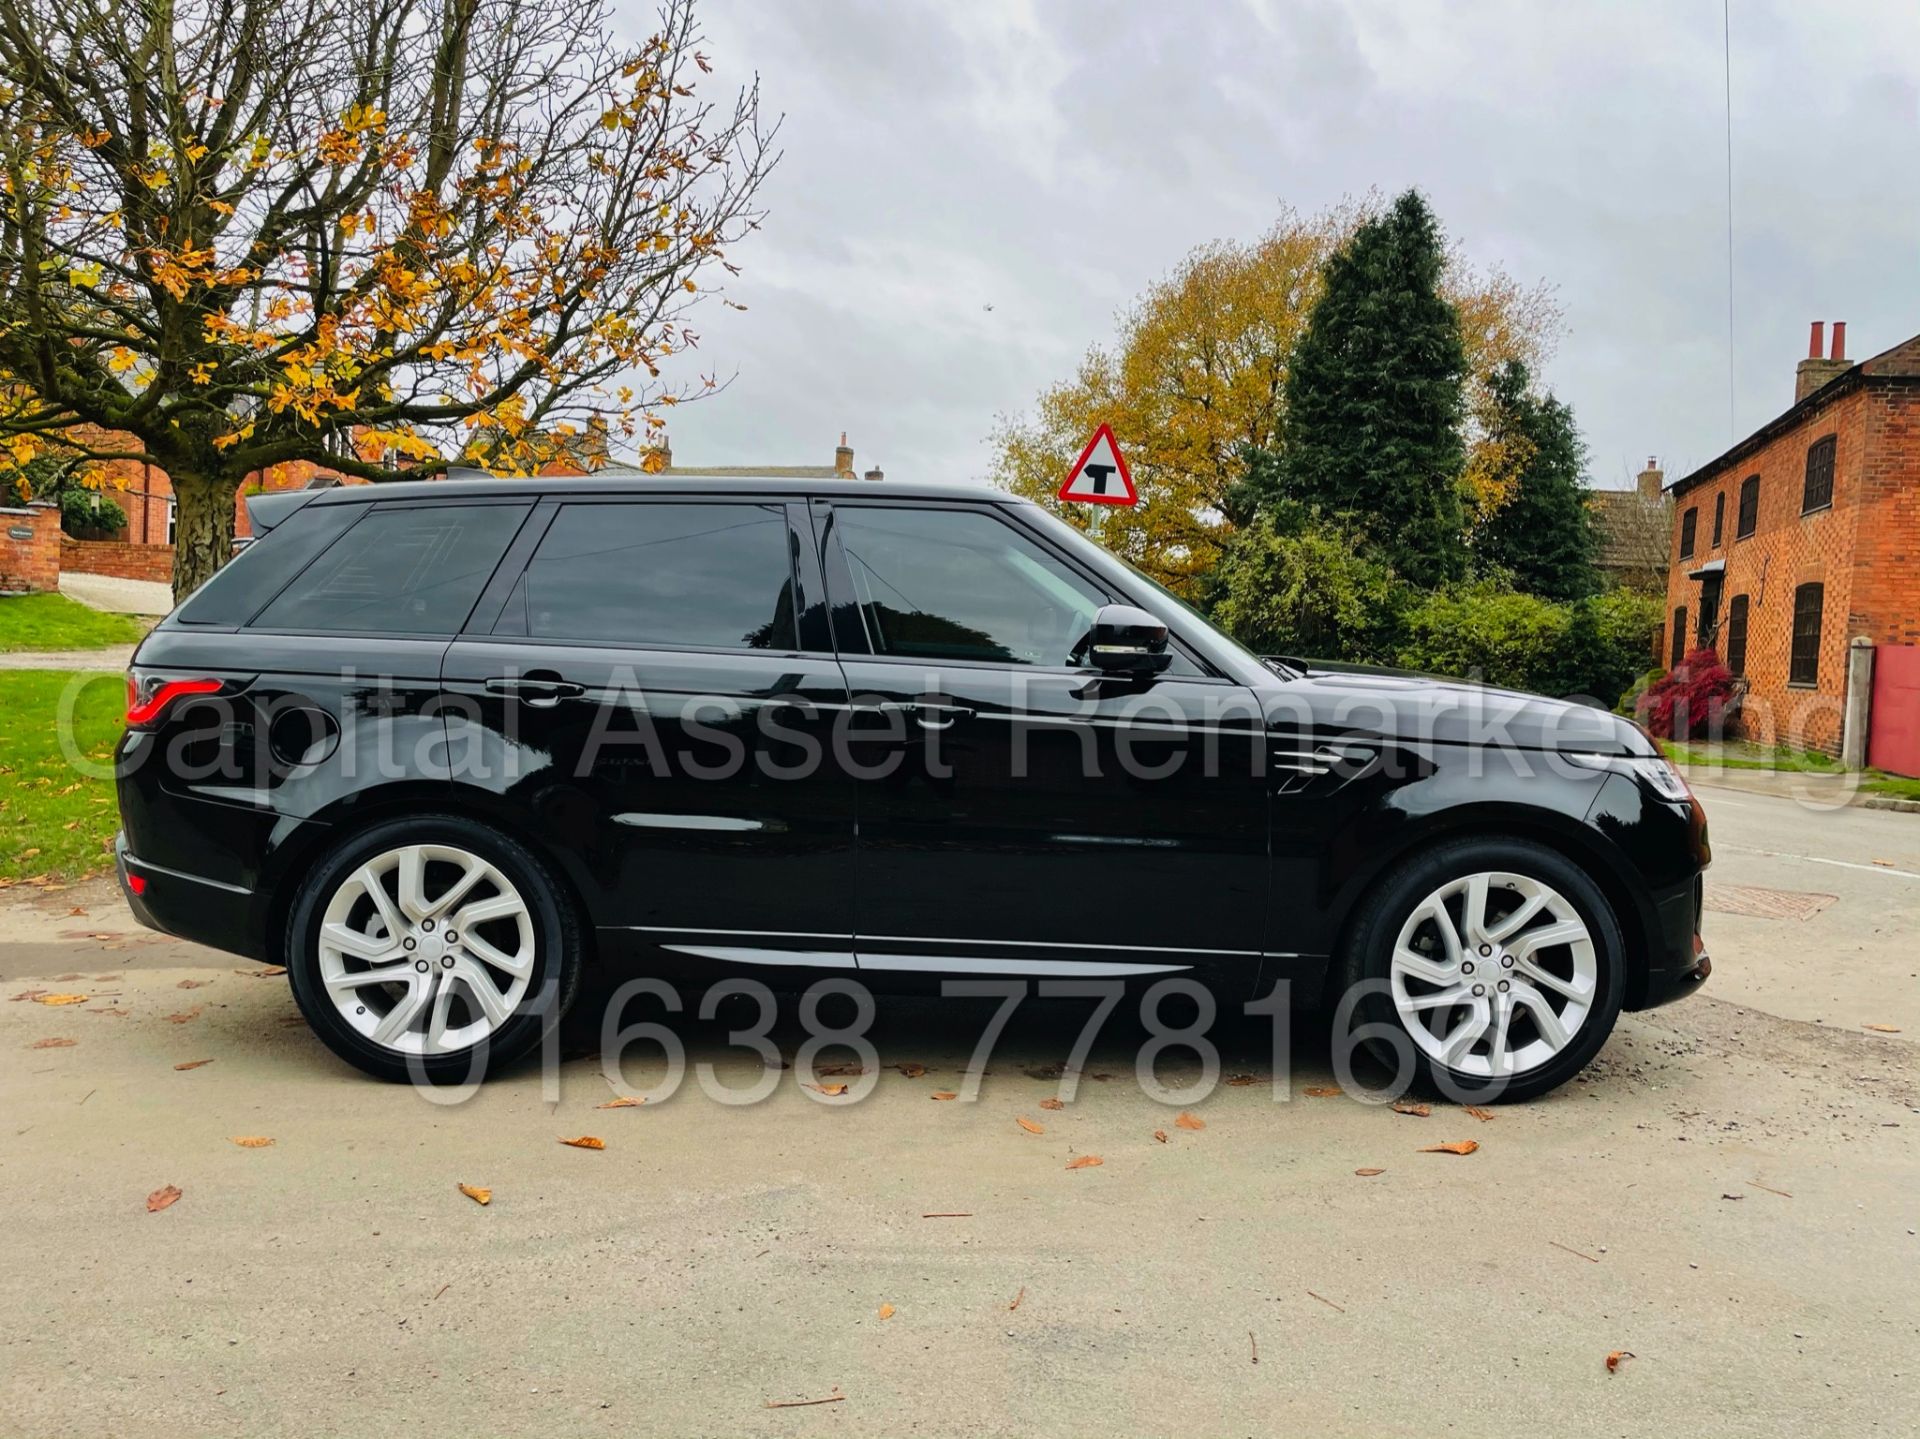 RANGE ROVER SPORT *HSE EDITION* SUV (2019 MODEL) '3.0 SDV6 - 306 BHP - 8 SPEED AUTO' *FULLY LOADED* - Image 14 of 56